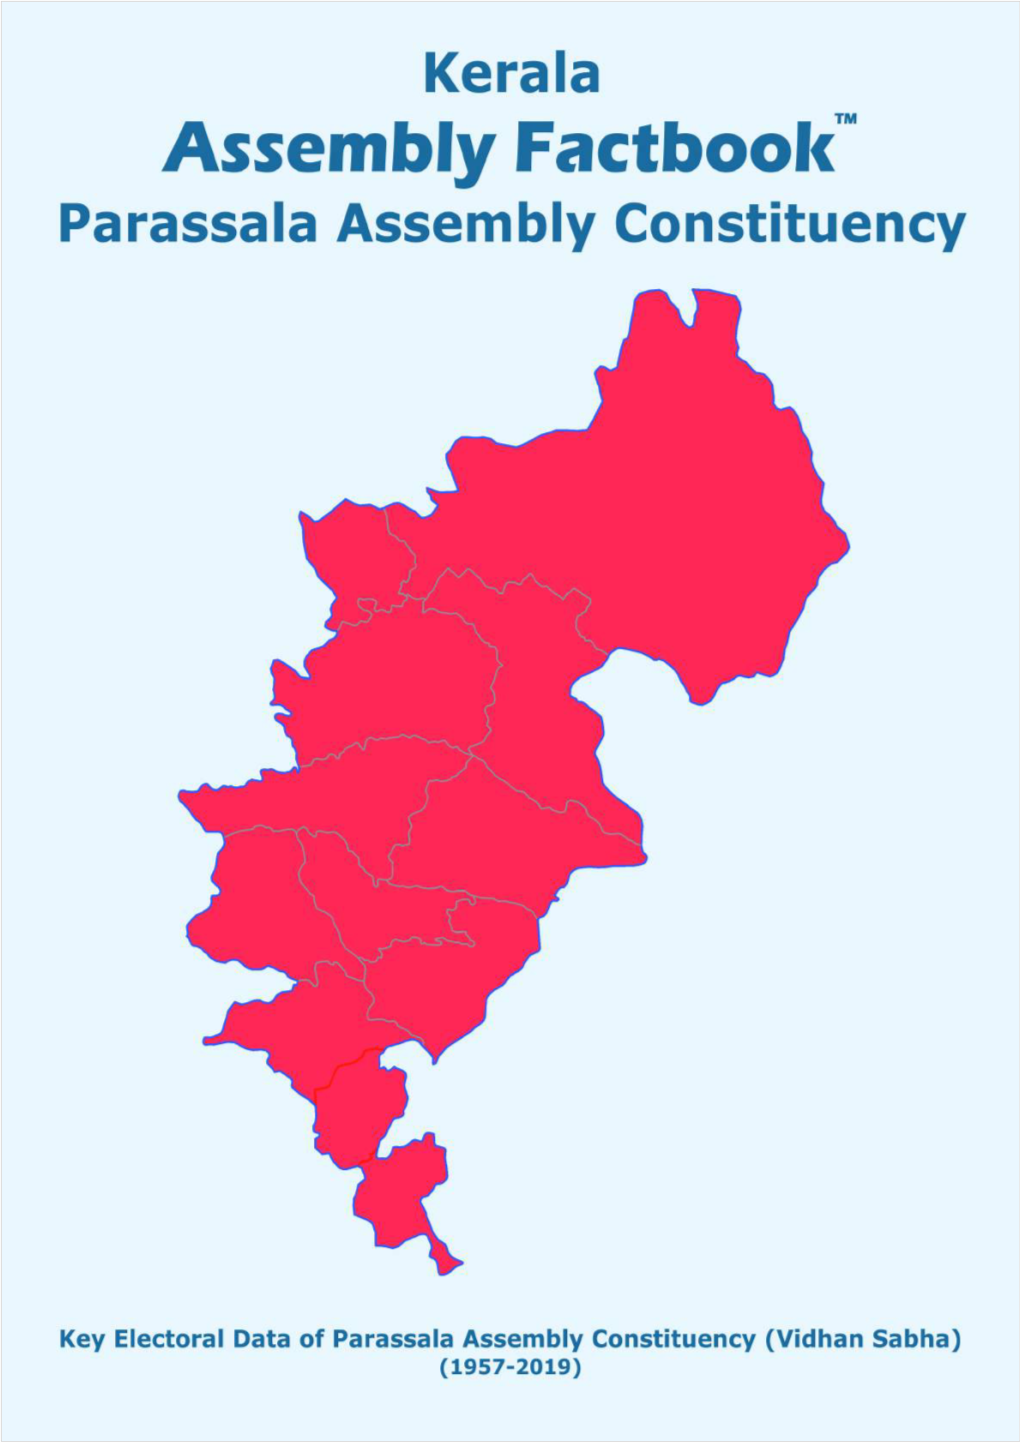 Key Electoral Data of Parassala Assembly Constituency